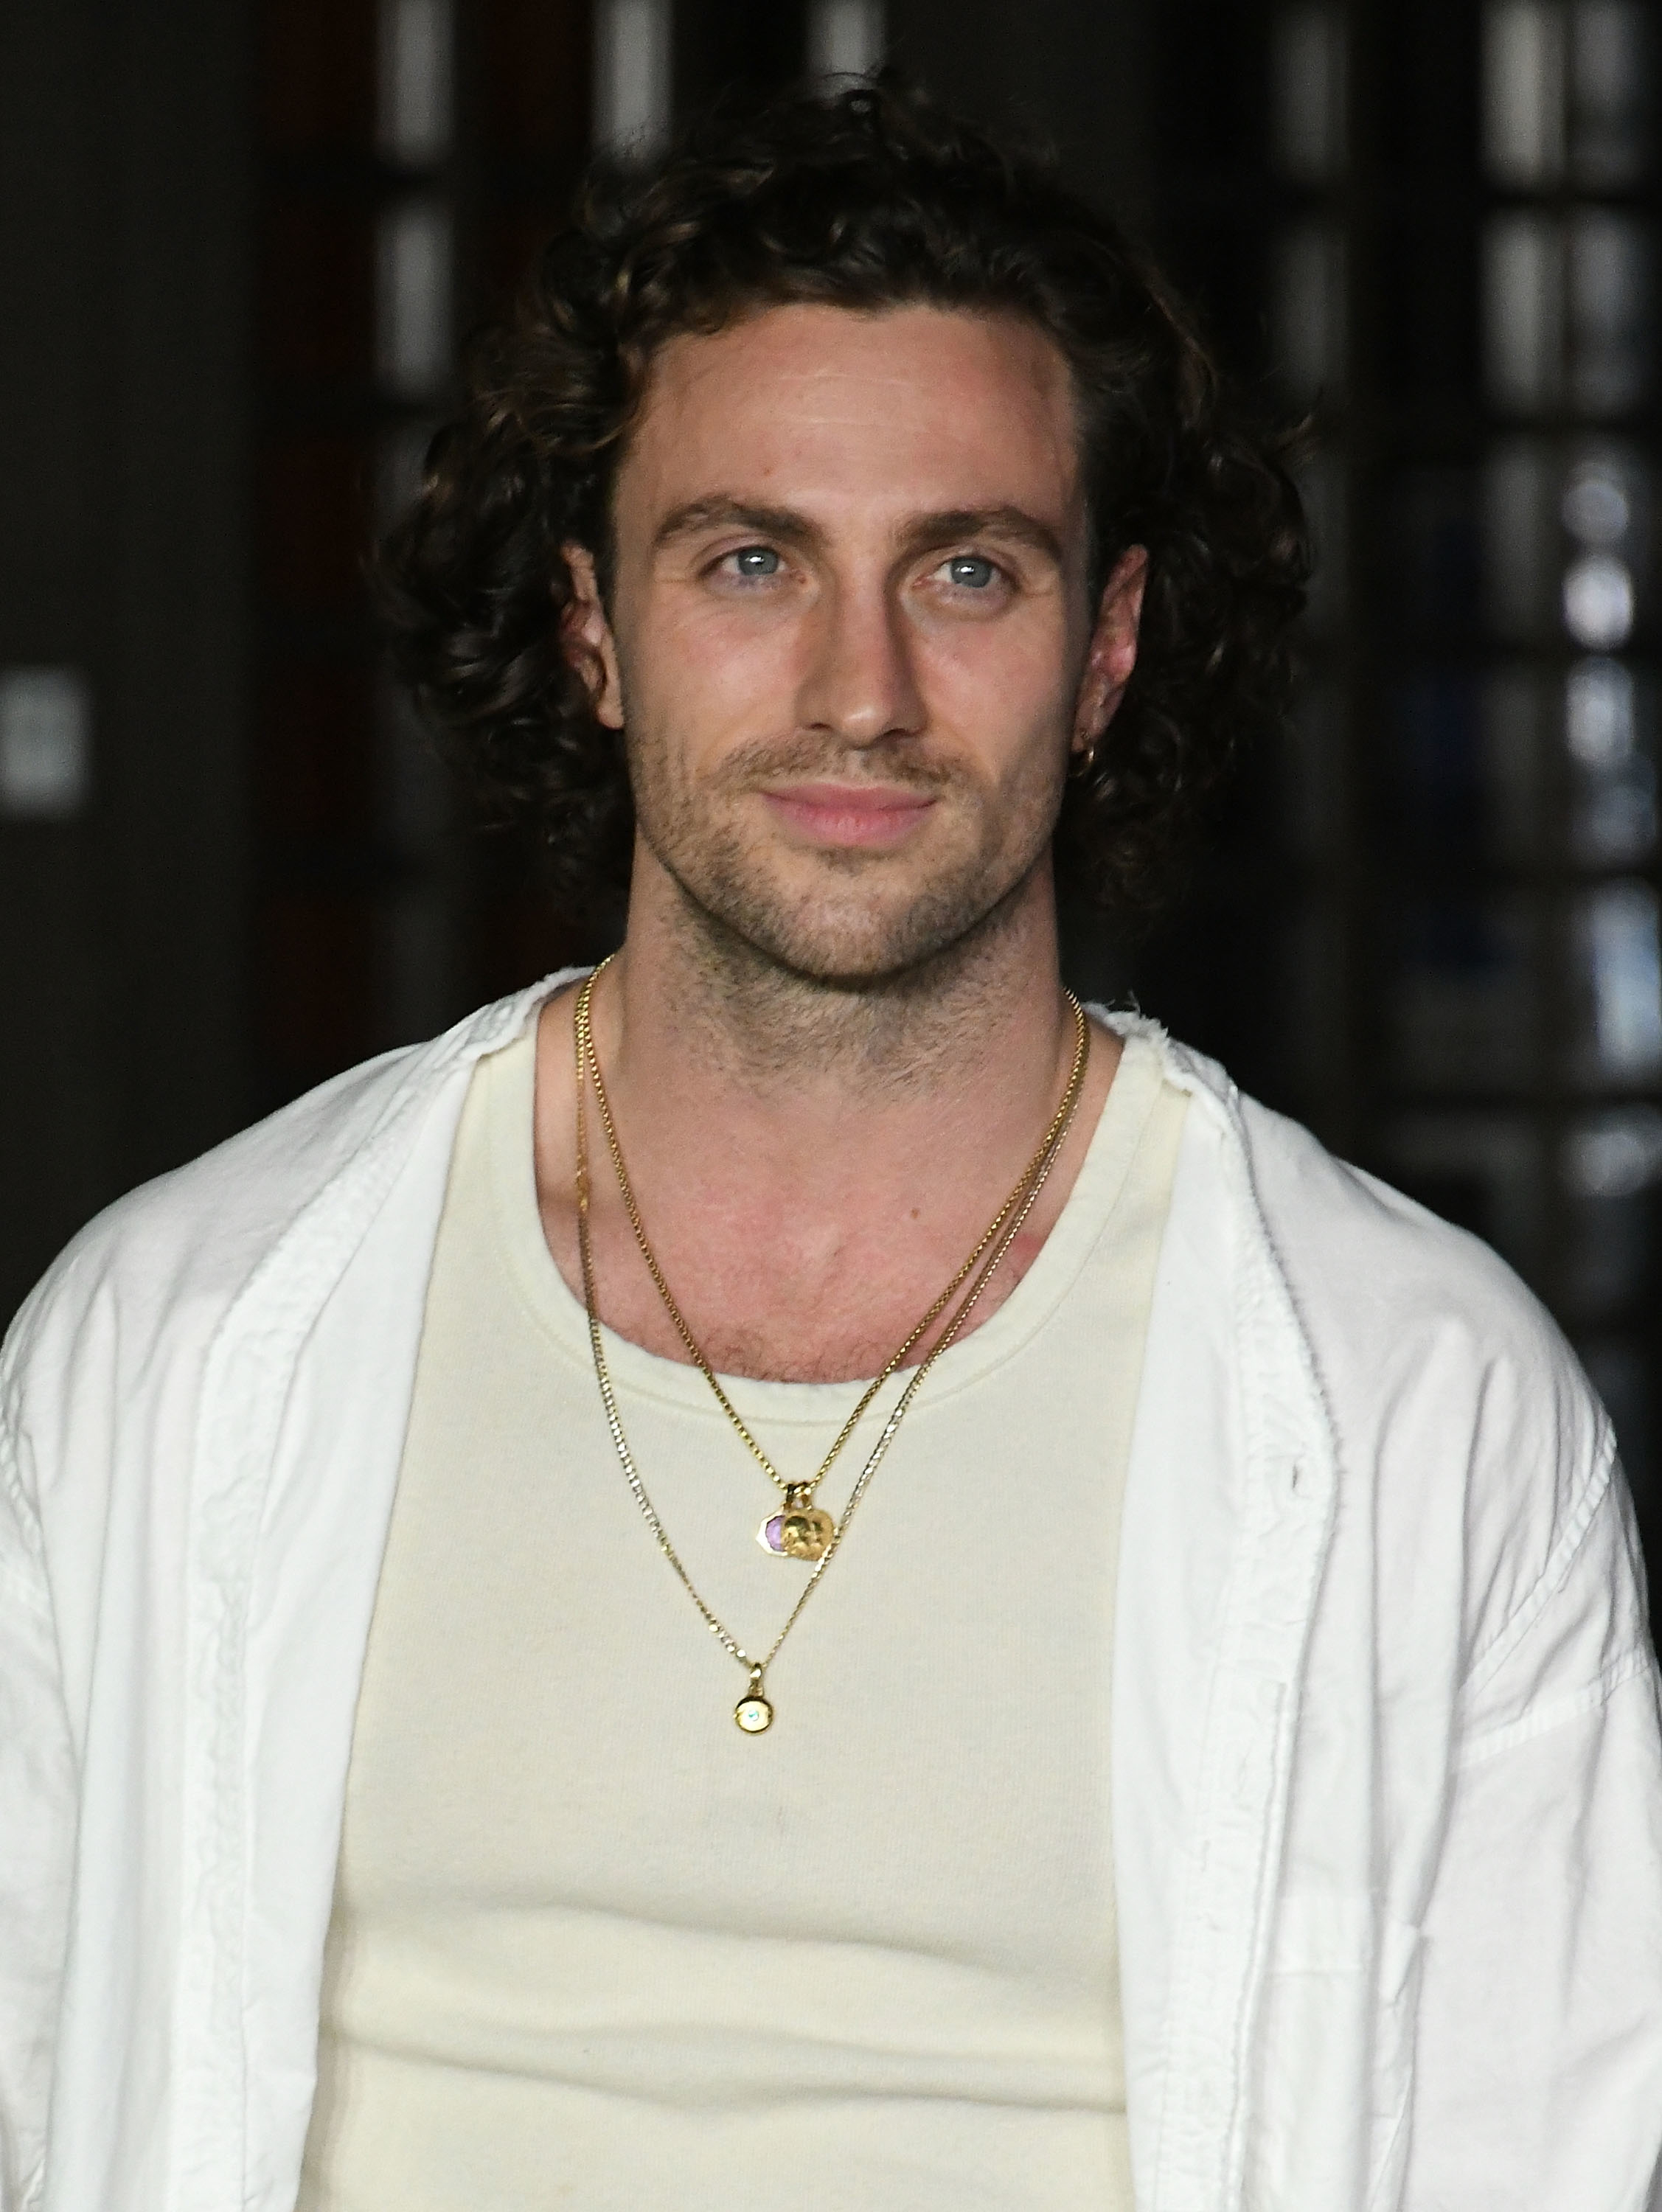 Aarib standing in a T-shirt layered with necklaces, looking directly at the camera